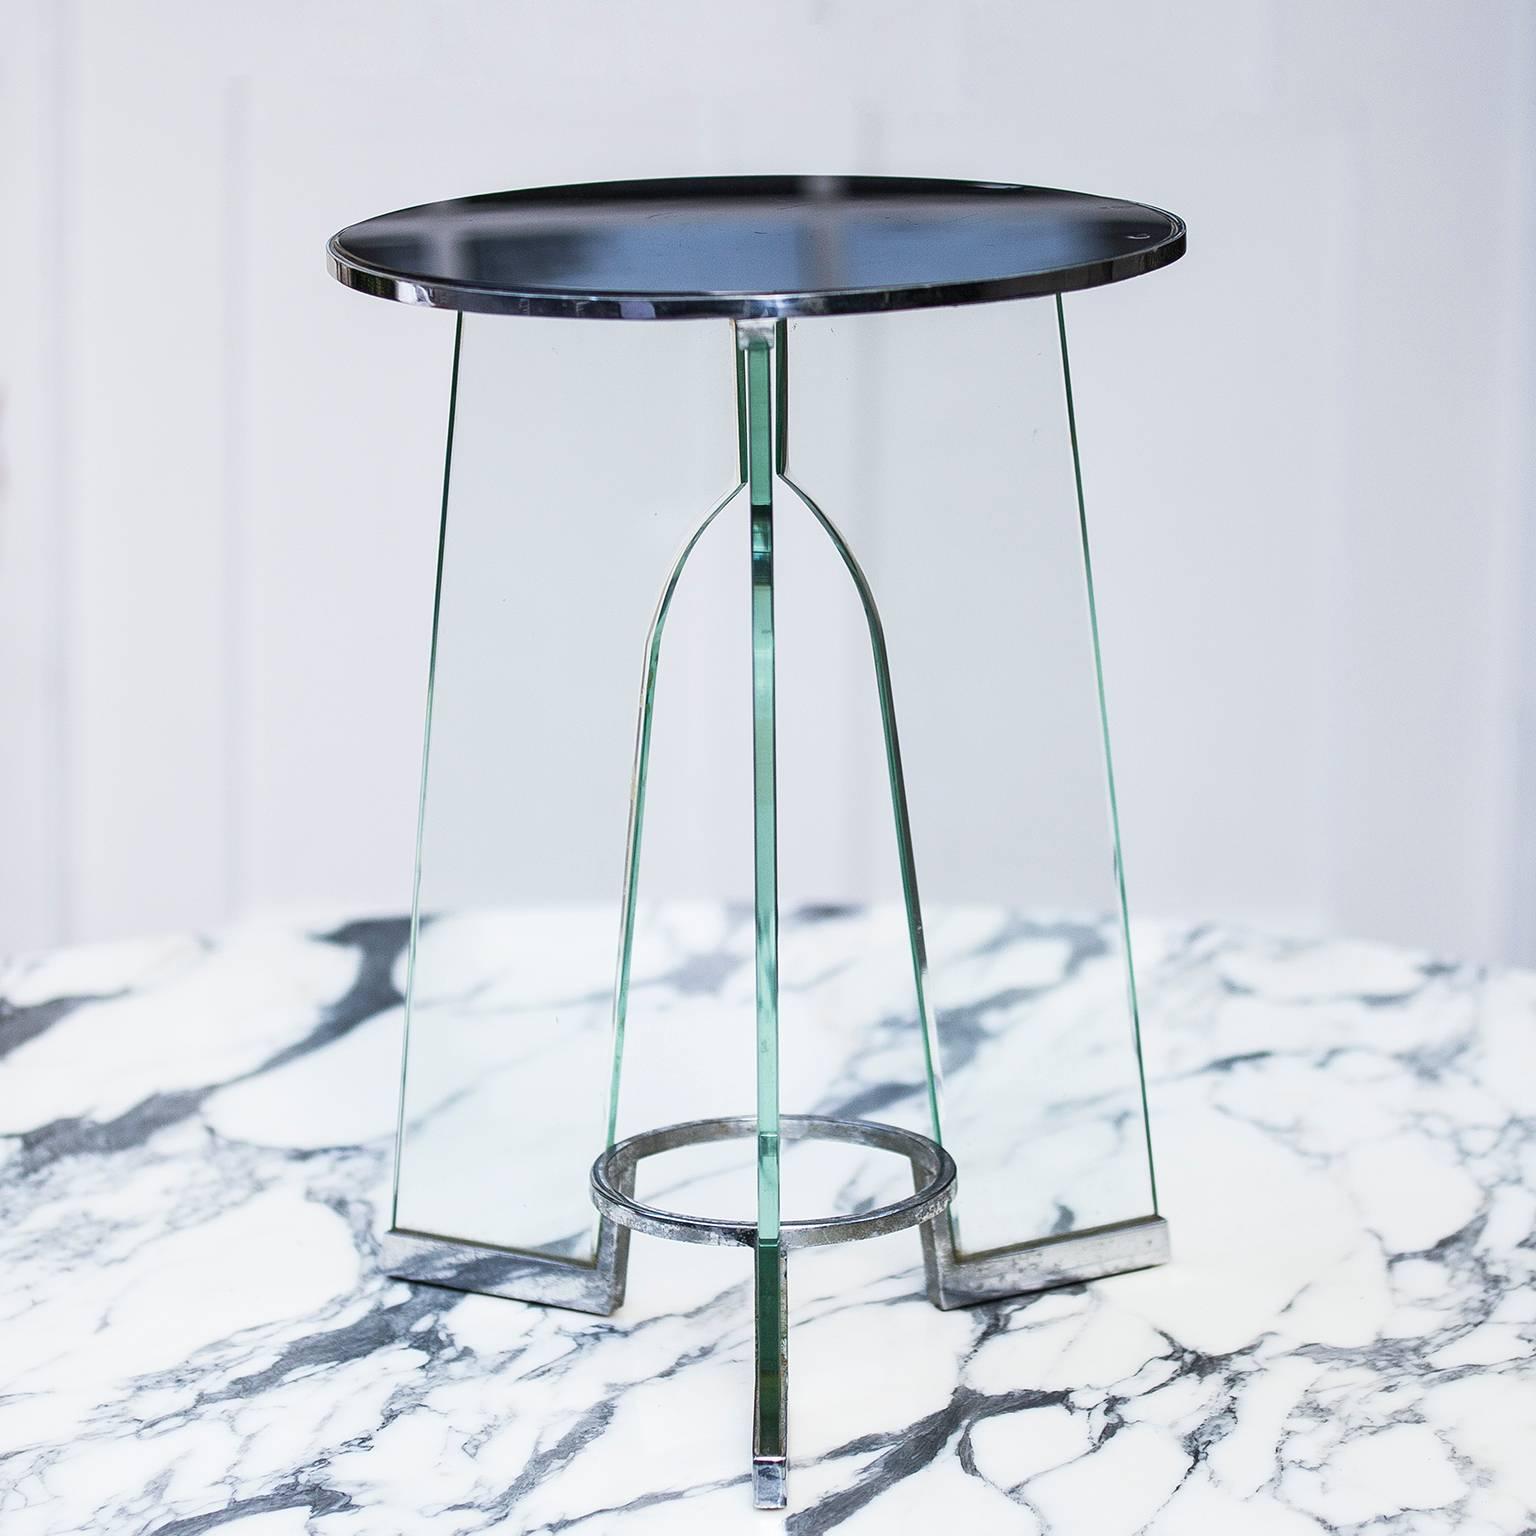 Gio Ponti occasional side table by Fontana Arte, Italy, 1931.
Black Vitrolite, tempered glass, chrome-plated brass.
Signed with acid-stamped manufacturer's marks to top and legs.
Very good original condition.
 